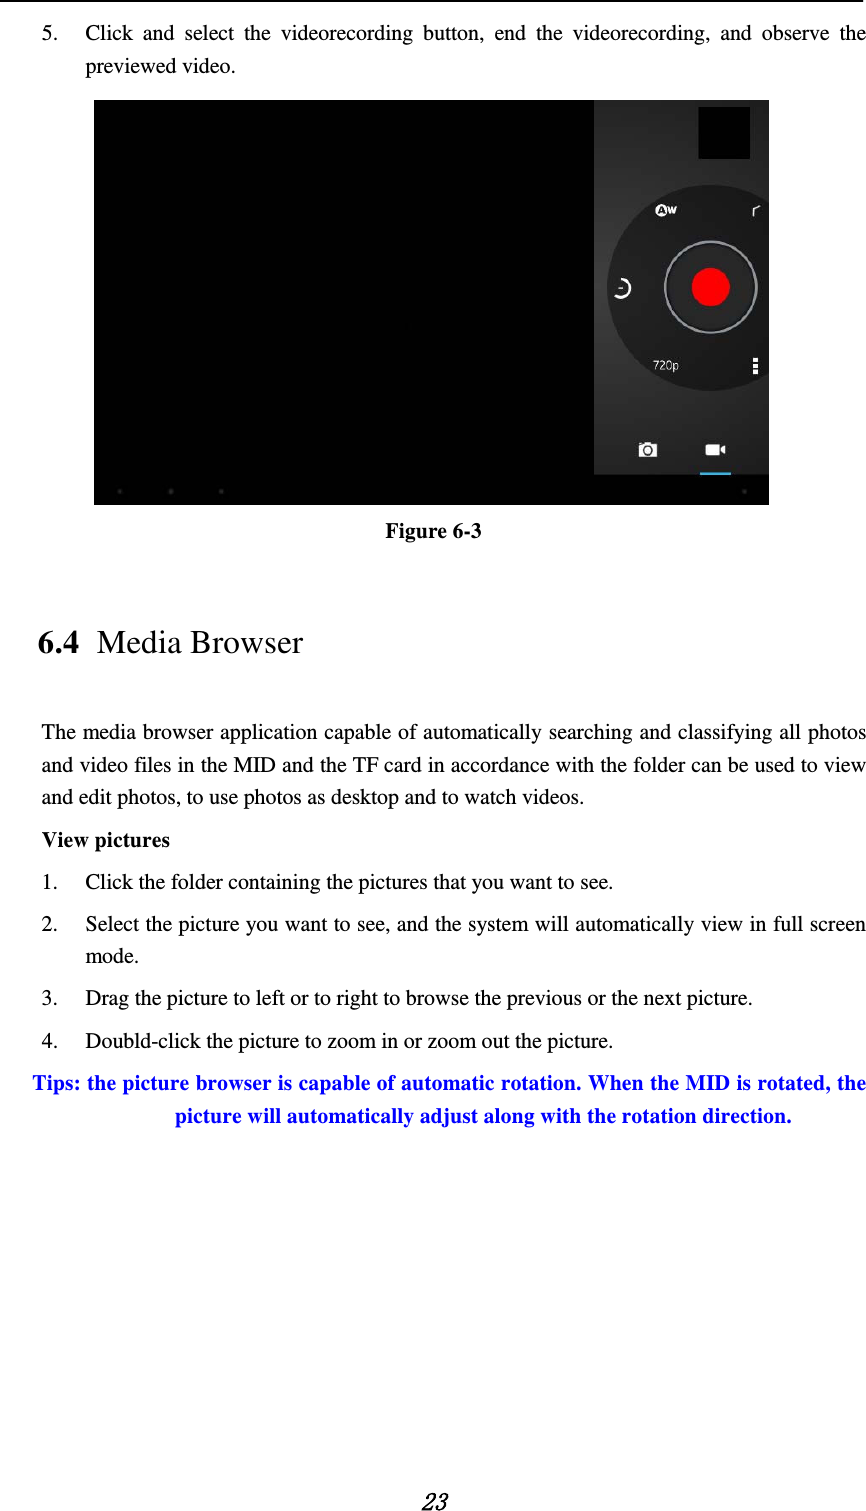   23 5. Click and select the videorecording button, end the videorecording, and observe the previewed video.    Figure 6-3 6.4 Media Browser The media browser application capable of automatically searching and classifying all photos and video files in the MID and the TF card in accordance with the folder can be used to view and edit photos, to use photos as desktop and to watch videos. View pictures 1. Click the folder containing the pictures that you want to see. 2. Select the picture you want to see, and the system will automatically view in full screen mode. 3. Drag the picture to left or to right to browse the previous or the next picture. 4. Doubld-click the picture to zoom in or zoom out the picture.  Tips: the picture browser is capable of automatic rotation. When the MID is rotated, the picture will automatically adjust along with the rotation direction. 